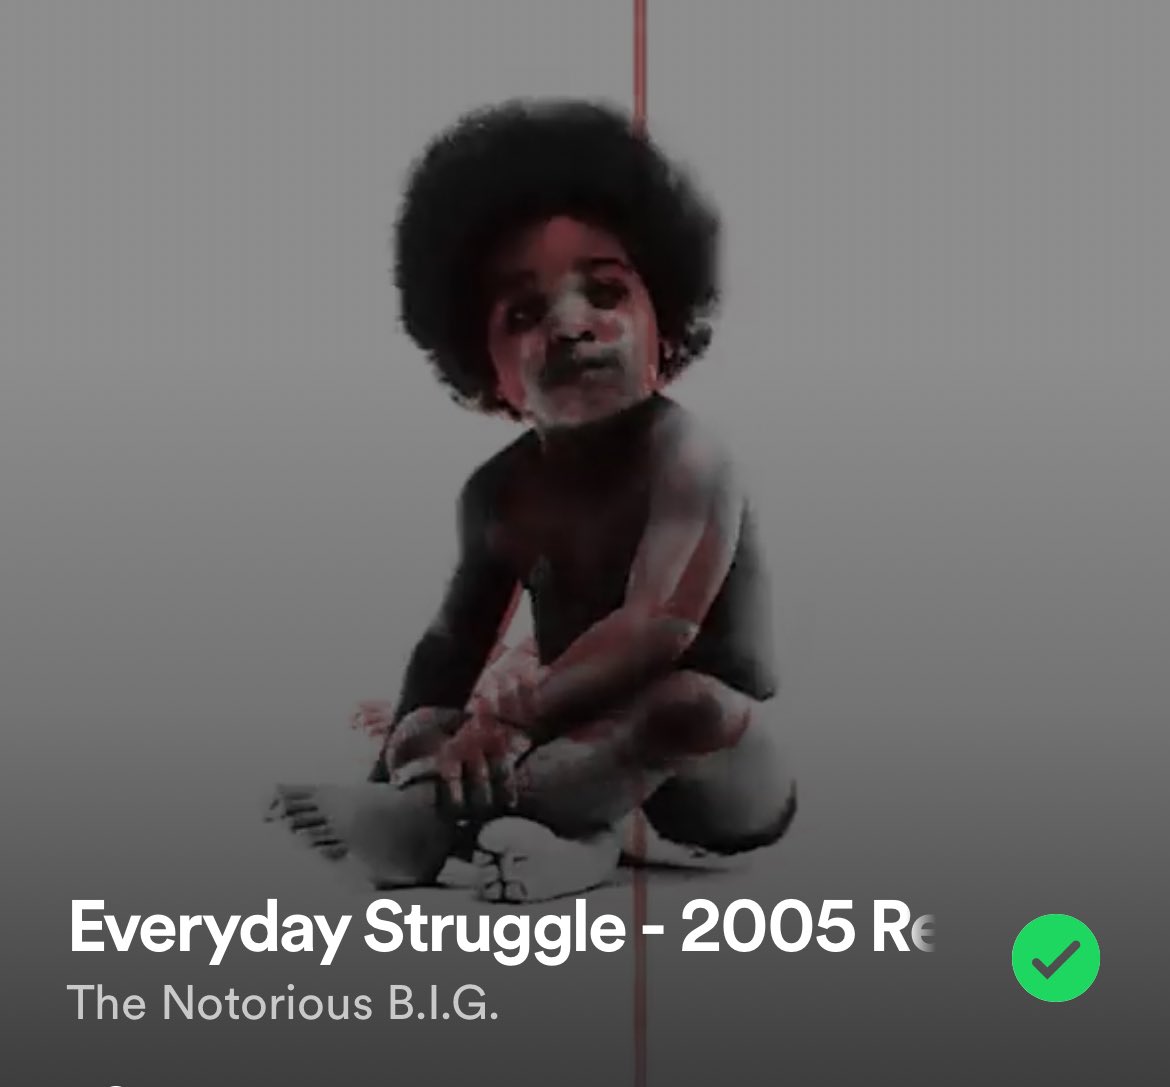 I know how it feel to wake up fucked up. Pockets broke as hell another rock to sell. But they don’t know about your stress filled day. Baby on the way mad bills to pay. Another day another struggle. #BiggieSmalls #ReadyToDie #WeMissYouBIG